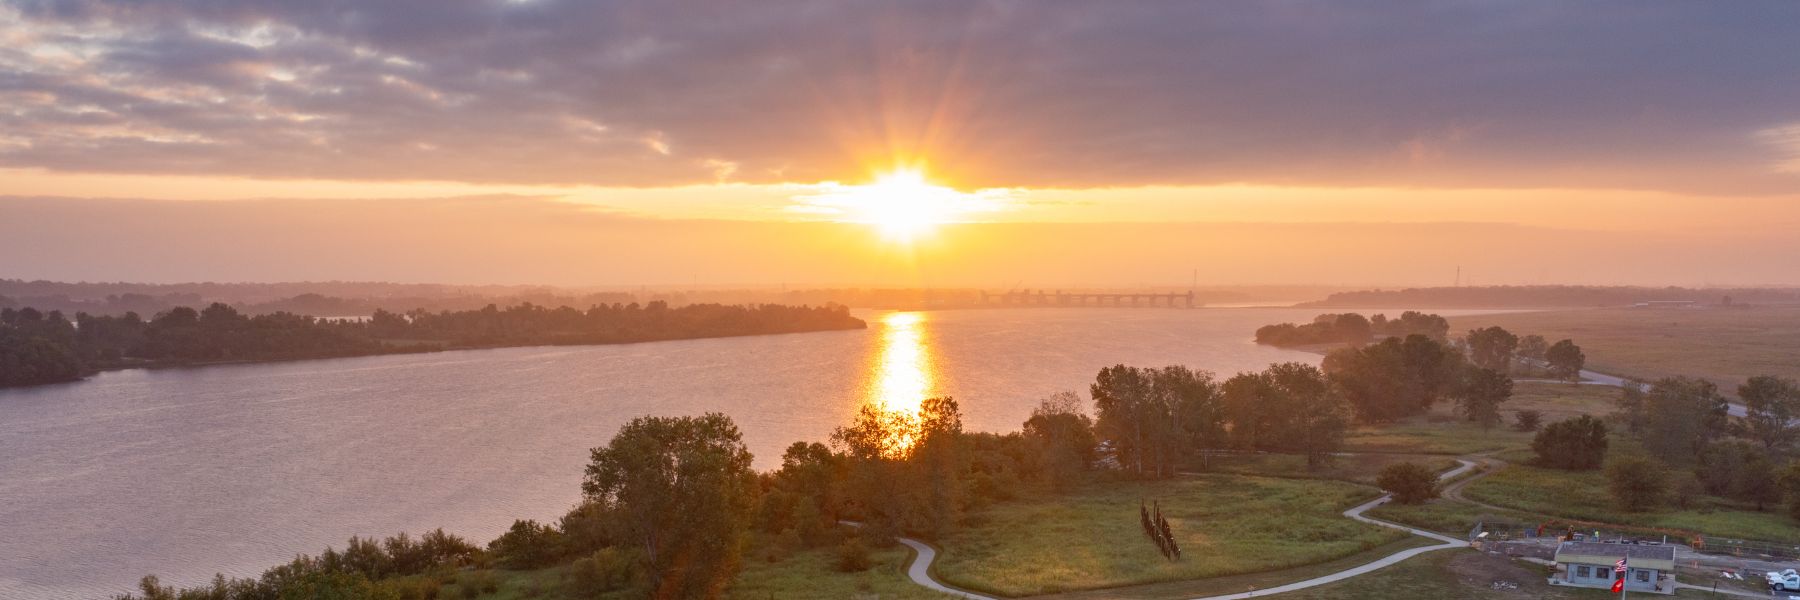 The Audubon Center at Riverlands aims to connect people to the beauty of the Great Rivers confluence.